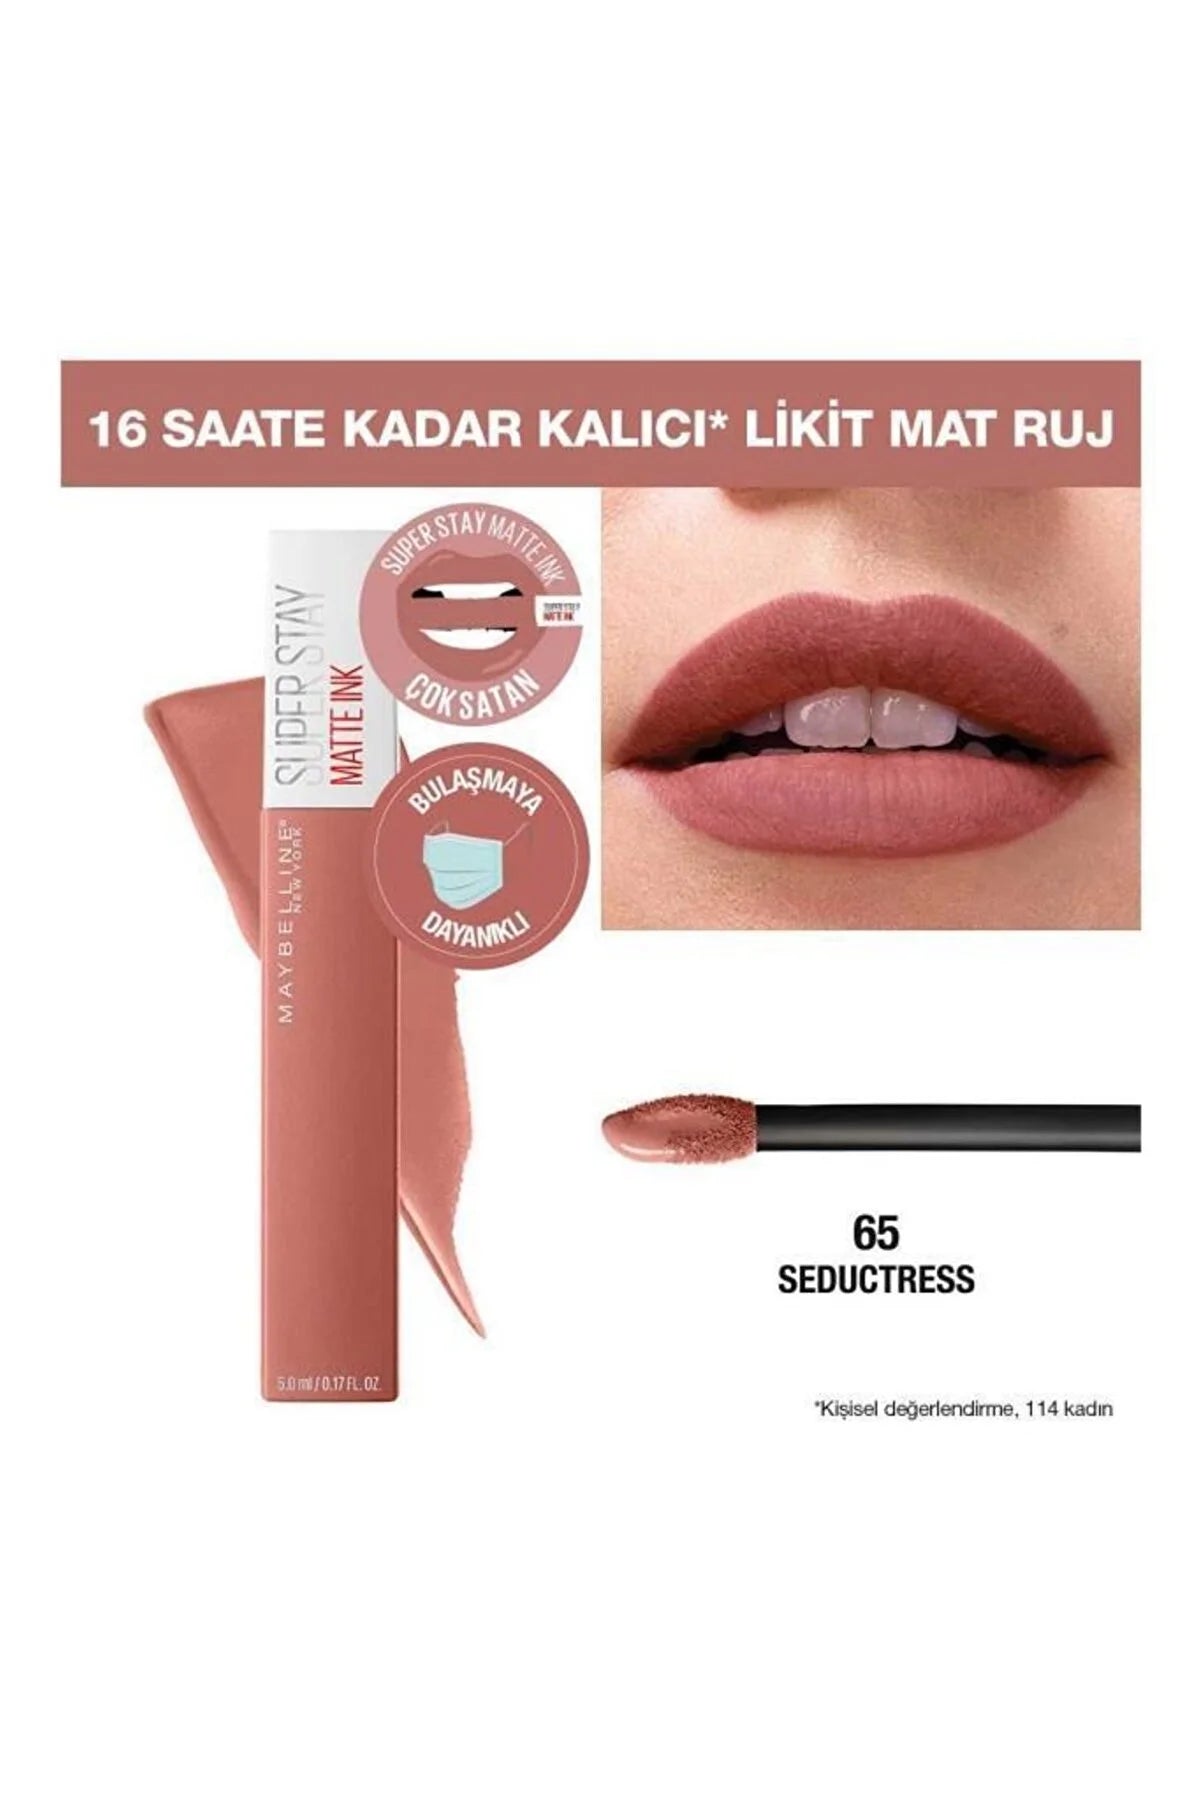 Stay Ruj Matte York - – New Maybelline Sed Unnude Mat Likit 65 Super Ink